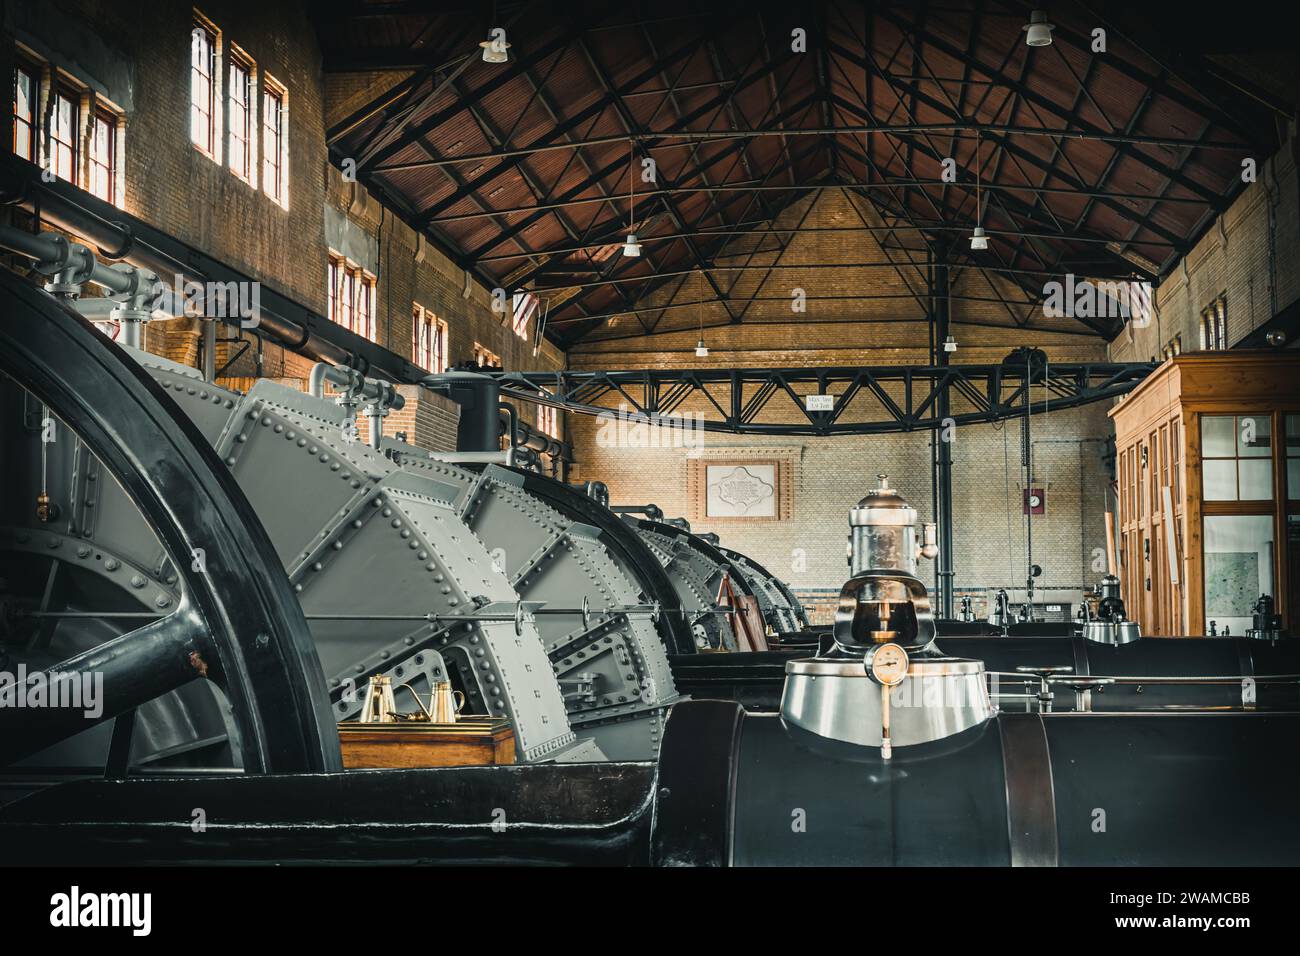 Lemmer, Netherlands - August 11, 2022: Machine hall with turbine in the world's largest steam pumping station in Lemmer, Netherlands. UNESCO World Her Stock Photo